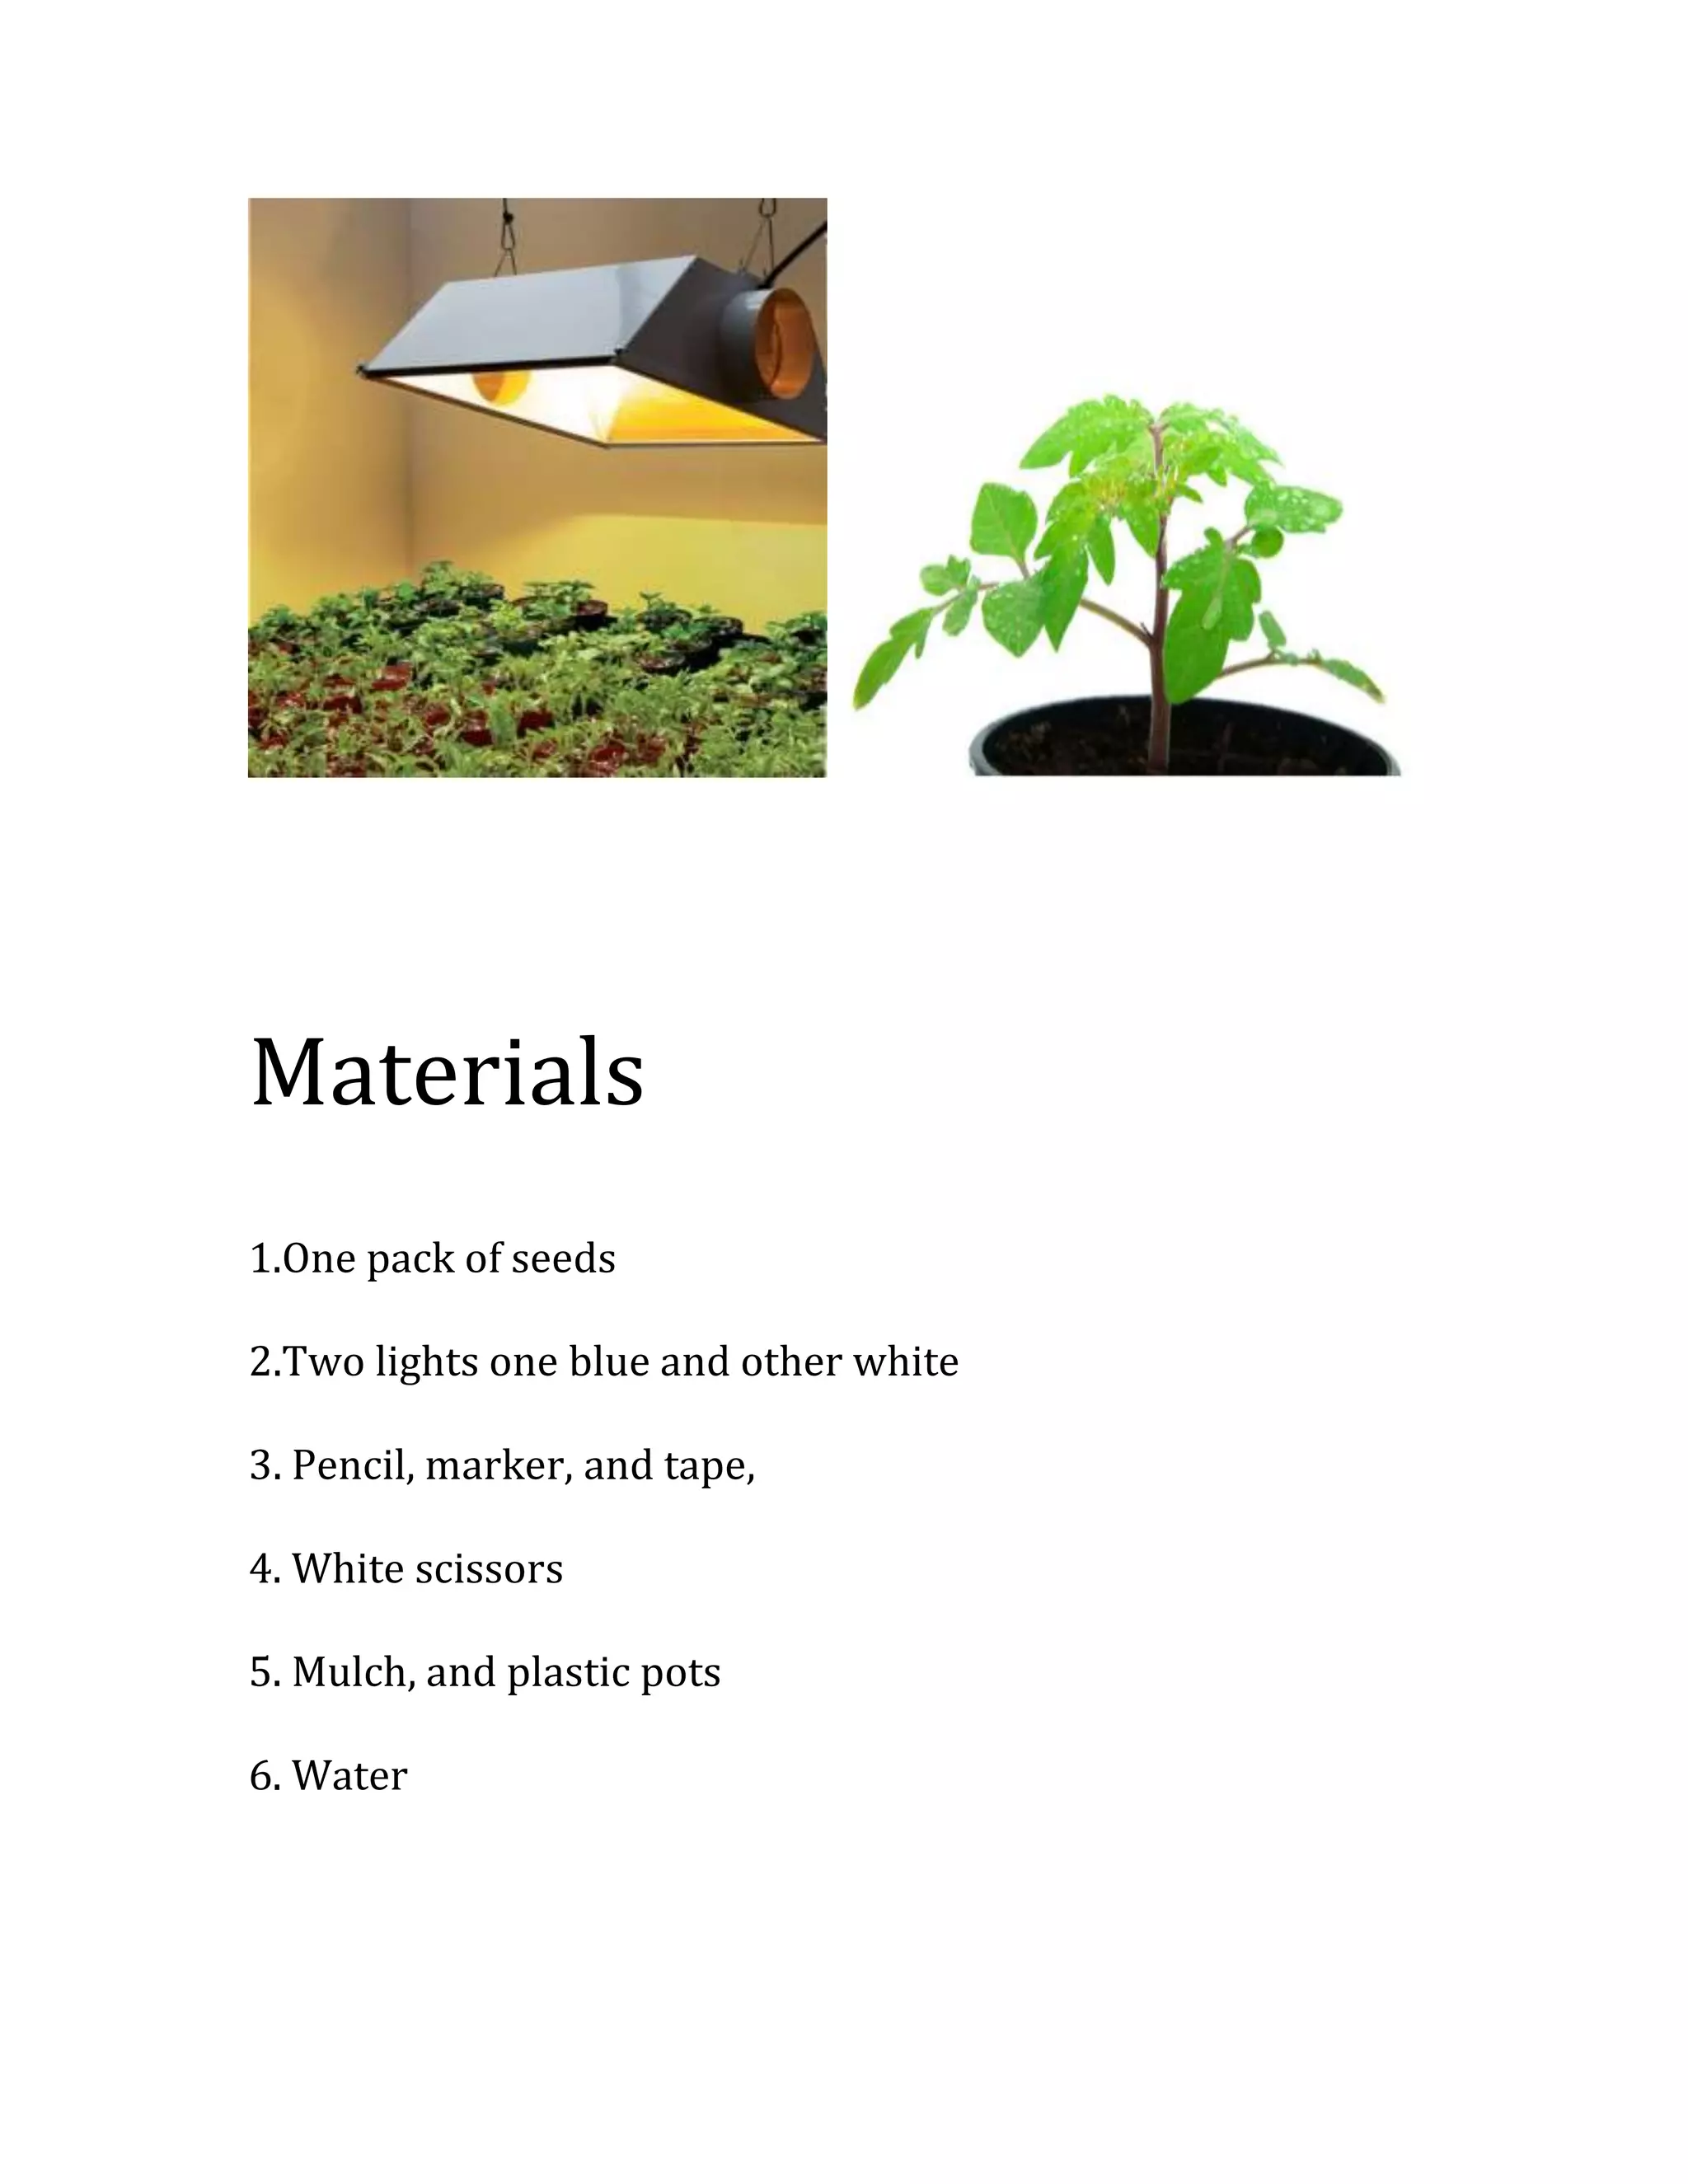 does light affect plant growth